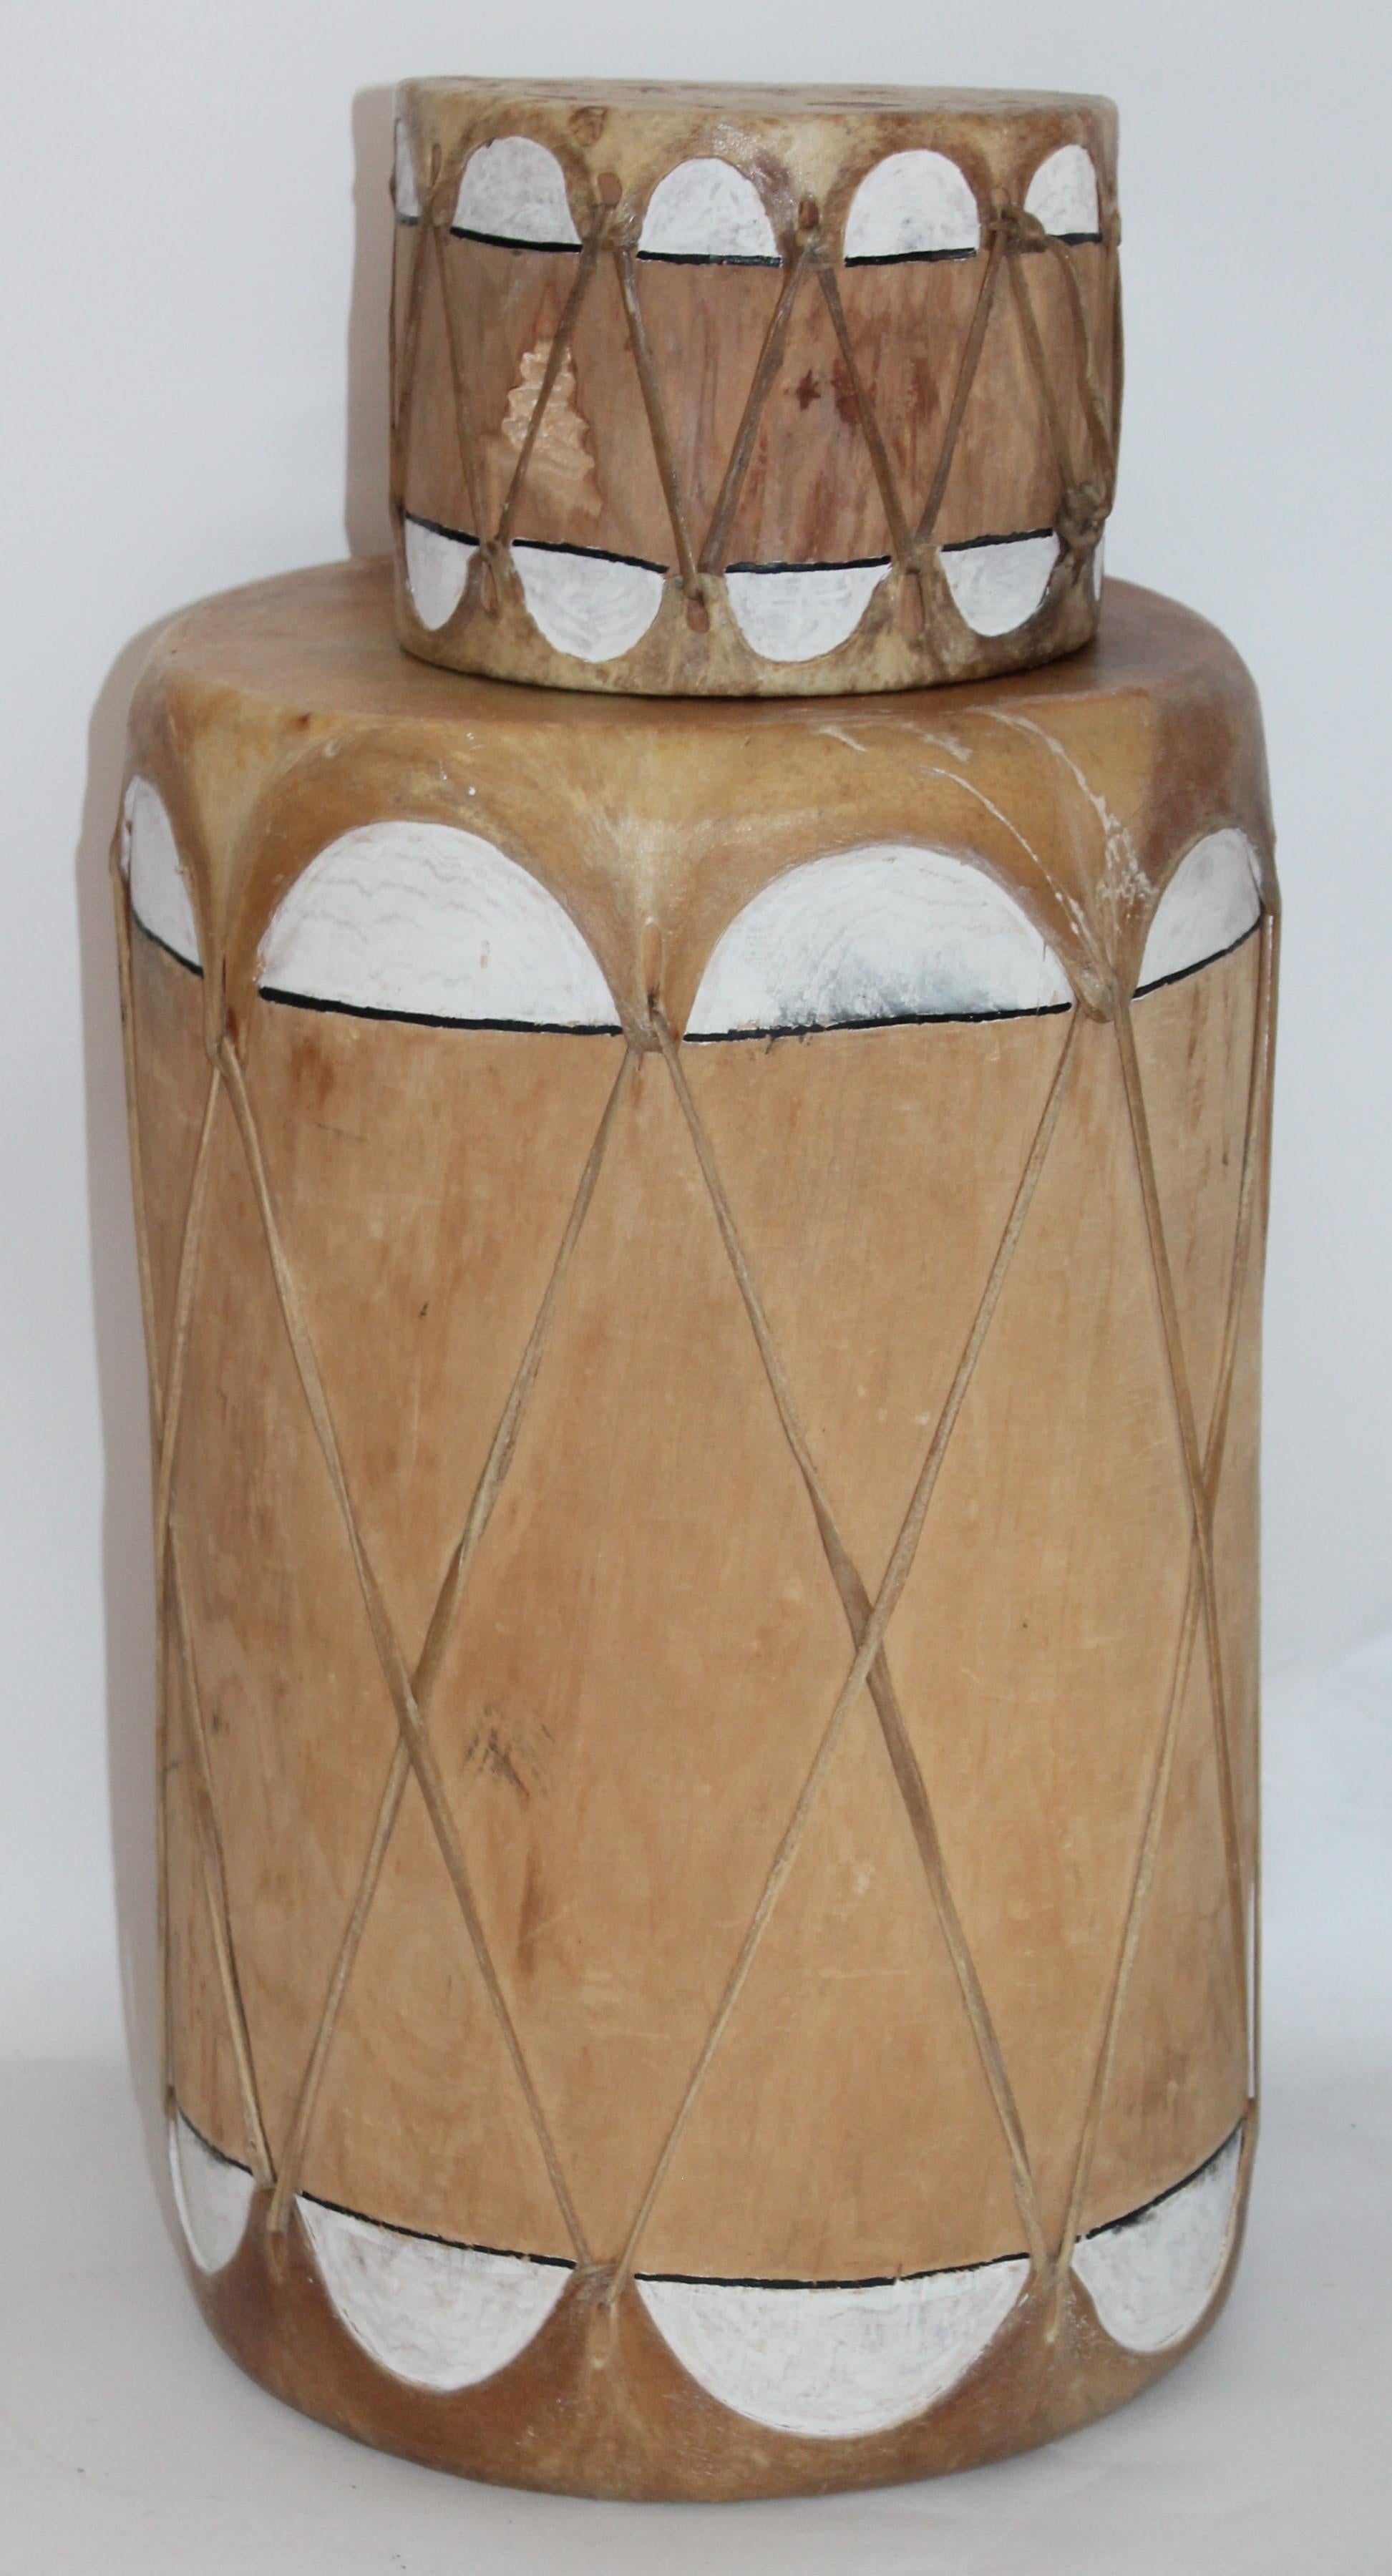 Pueblo drum set of matching drums.

Set of 2 natural colored drums with white accents.
The drums are made of leather and wood. 

Smaller drum measures - 6 x 4 
Larger drum measures - 10 x 16.